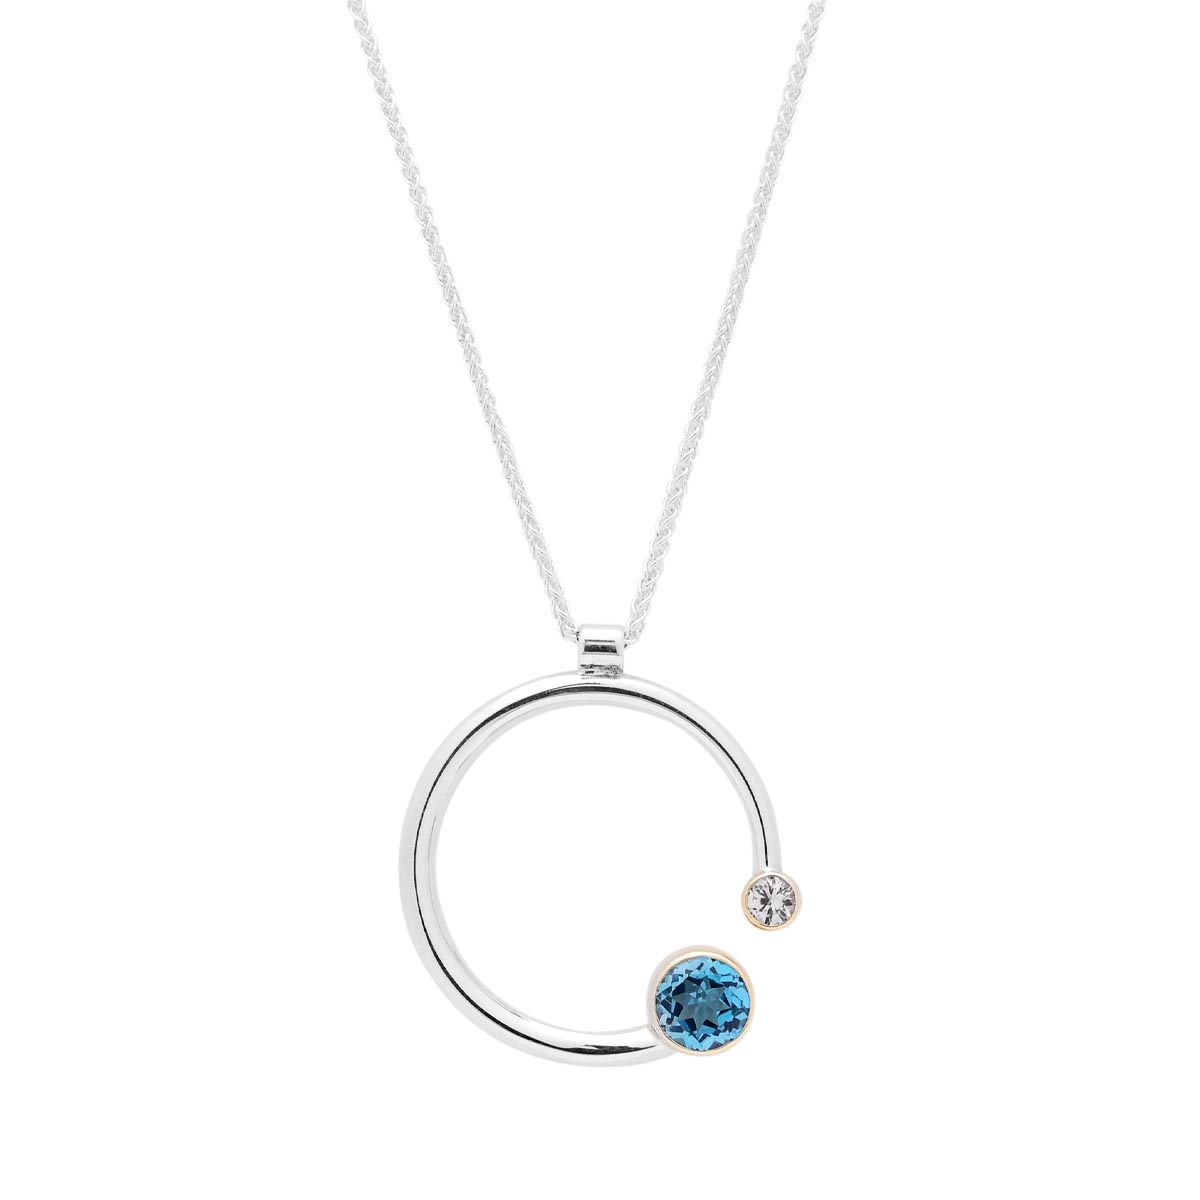 E.L. Designs Blue Topaz Stargazer Necklace in Sterling Silver and 14kt Yellow Gold with White Sapphire